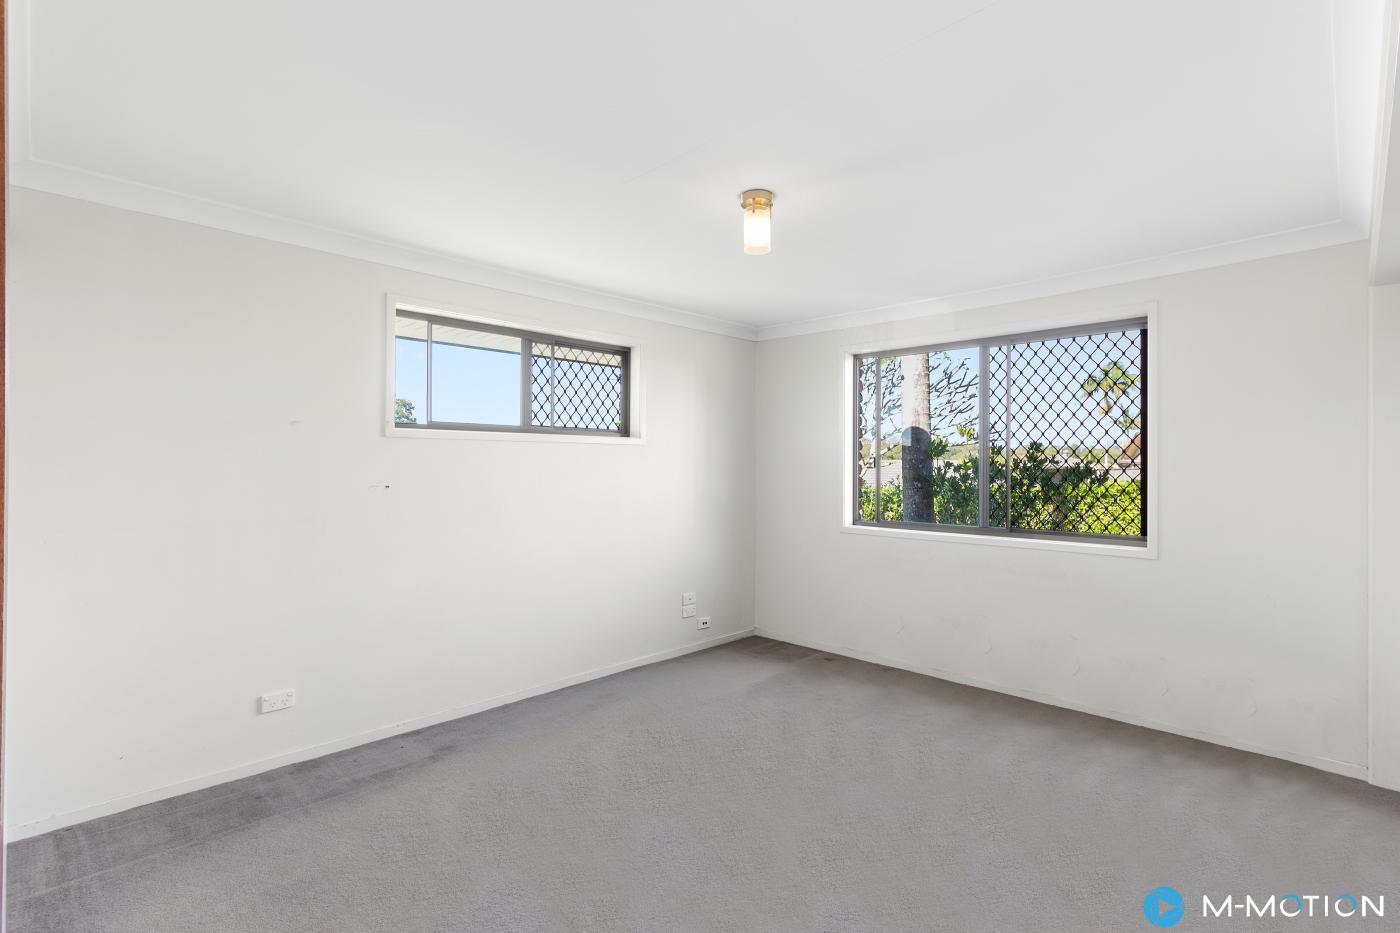 6 Dearne Place, Cararra, M-Motion Real Estate James Ford